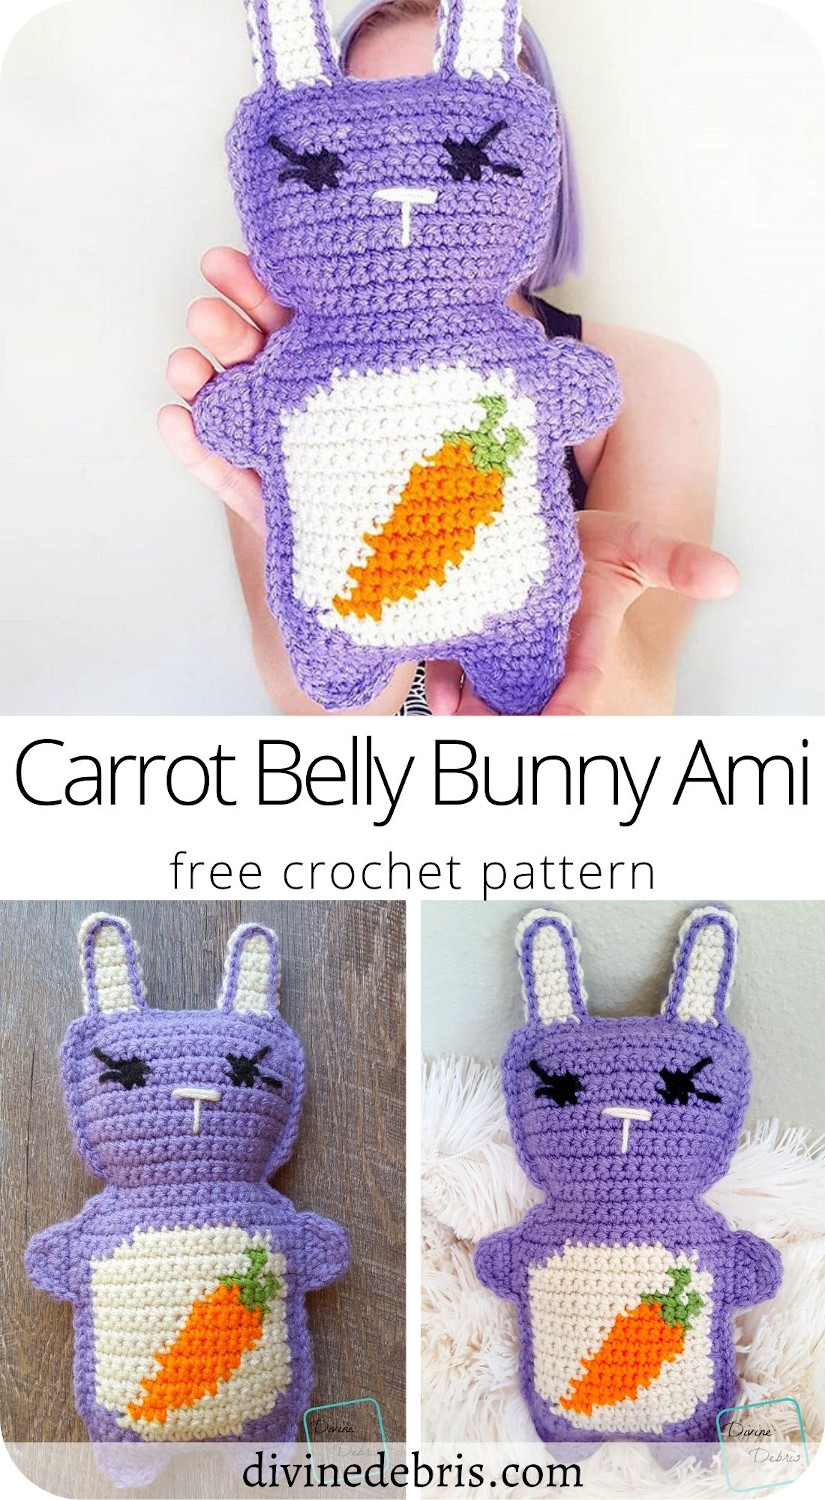 Make Easter super fun by learning to make the Carrot Belly Bunny Amigurumi from a free crochet pattern on DivineDebris.com